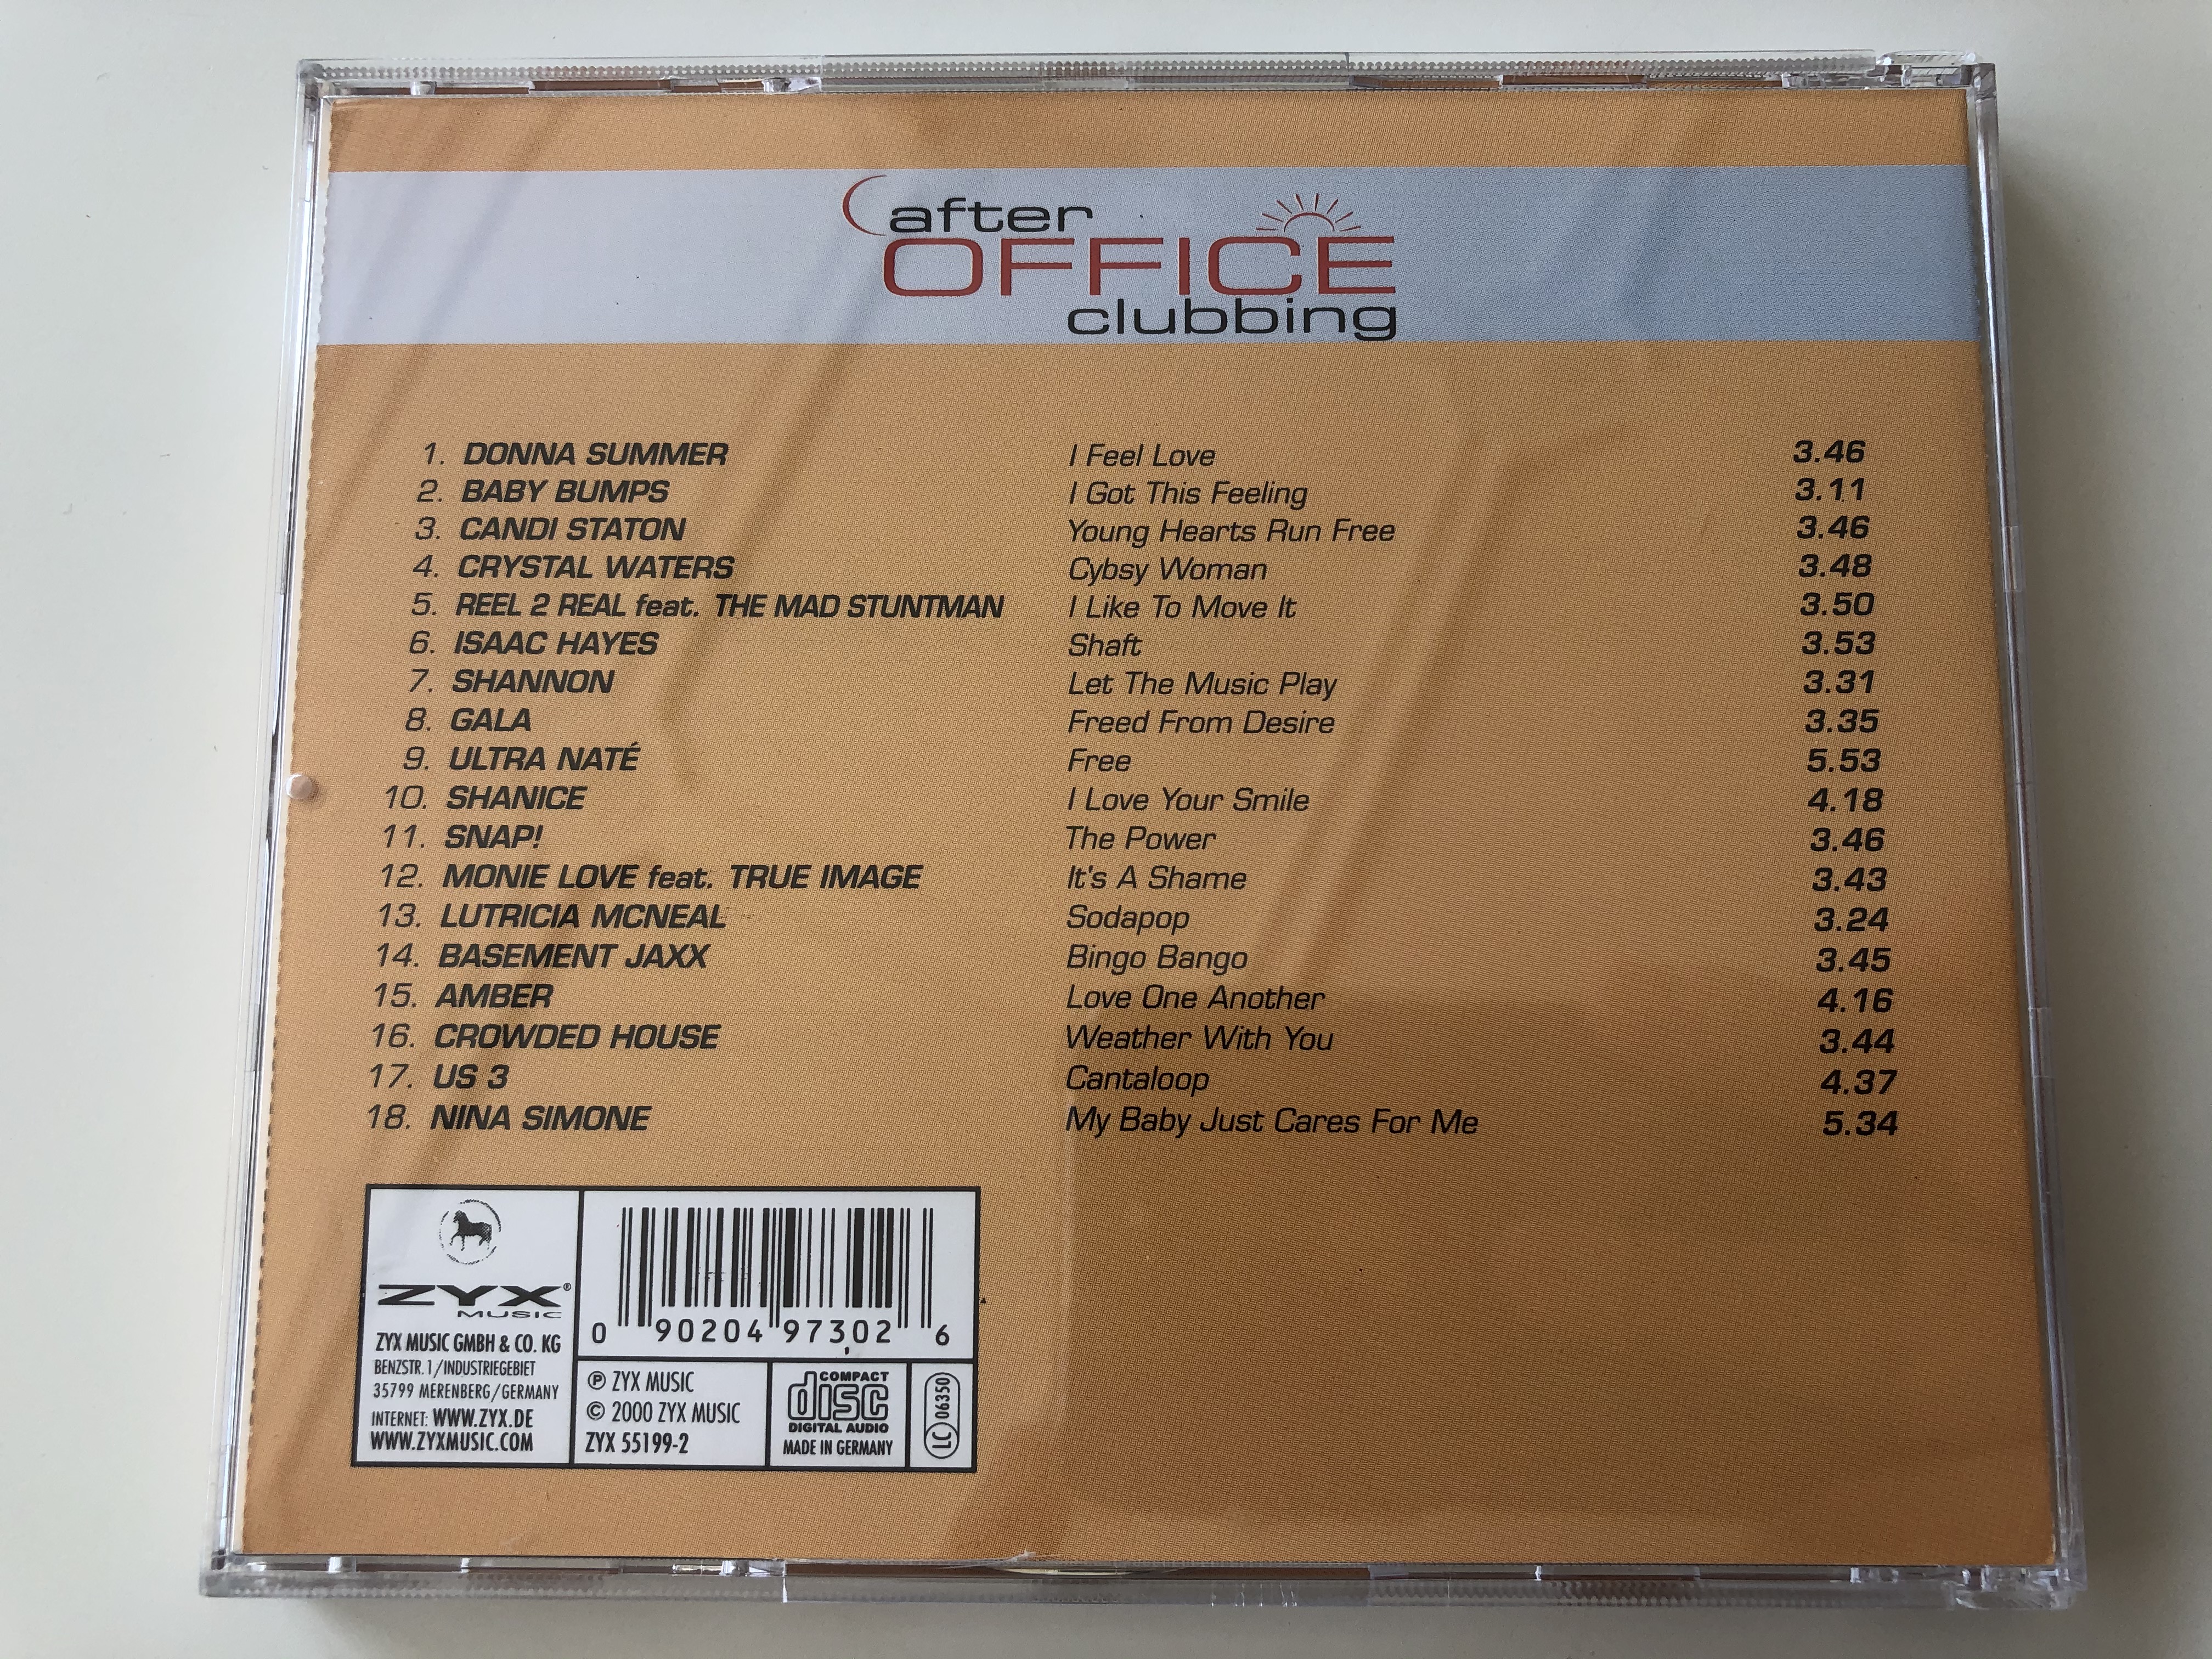 after-office-clubbing-featuring-ultra-nate-donna-summer-us-3-basement-jaxx-isaac-hayes...-and-many-more-zyx-music-audio-cd-2000-zyx-55199-2-5-.jpg